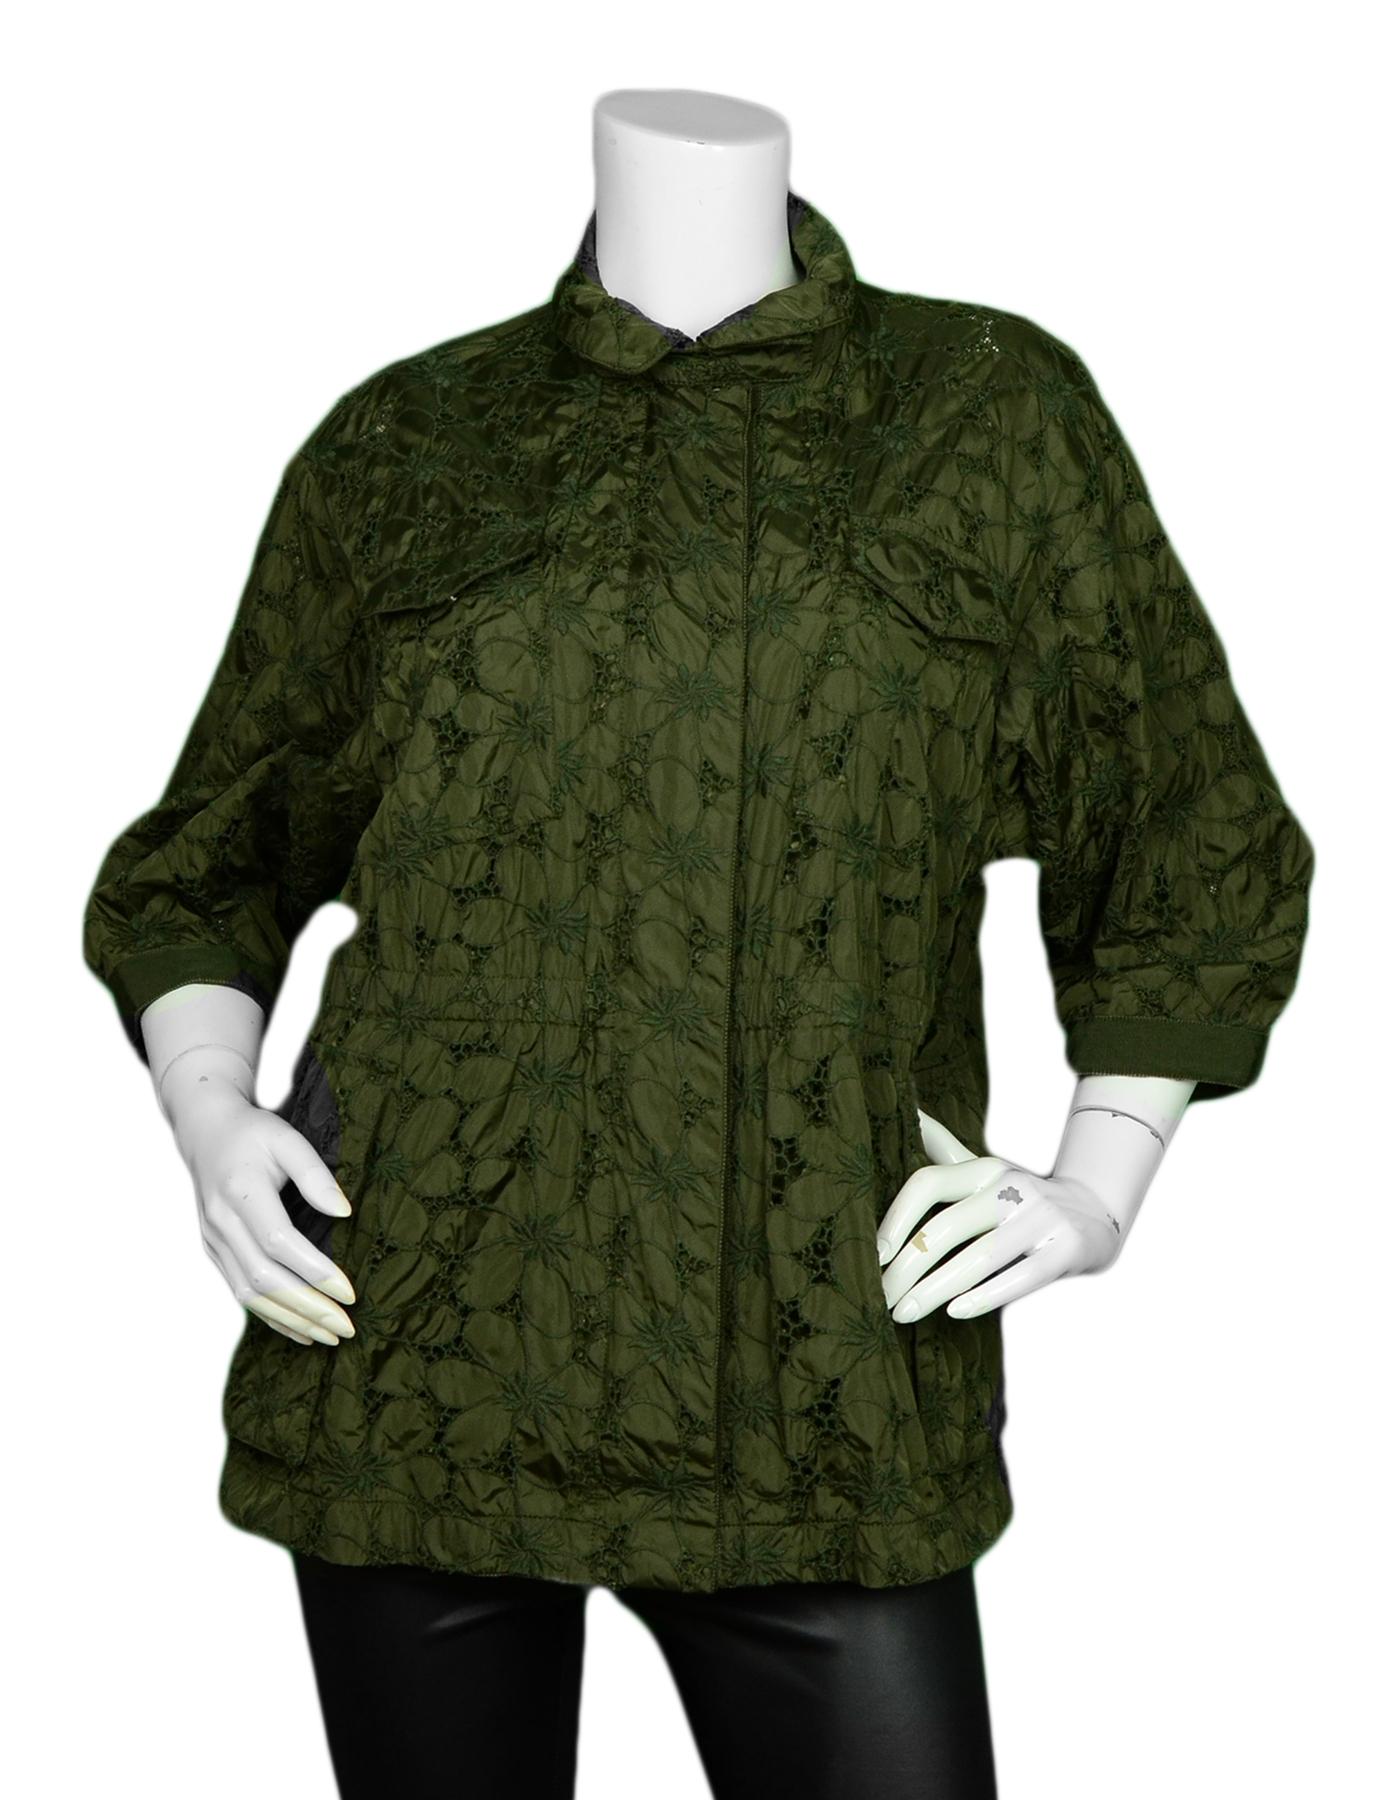 Moncler Green Tatin Lace Eyelet 3/4 Sleeve Jacket sz 2

Made In: Romania 
Color: Dark Green
Materials: 100% Nylon
Embroidery: 85% Cotton, 15% Polyester  
Lining: 100% Nylon
Opening/Closure: Front zip-up
Overall Condition: Excellent pre-owned